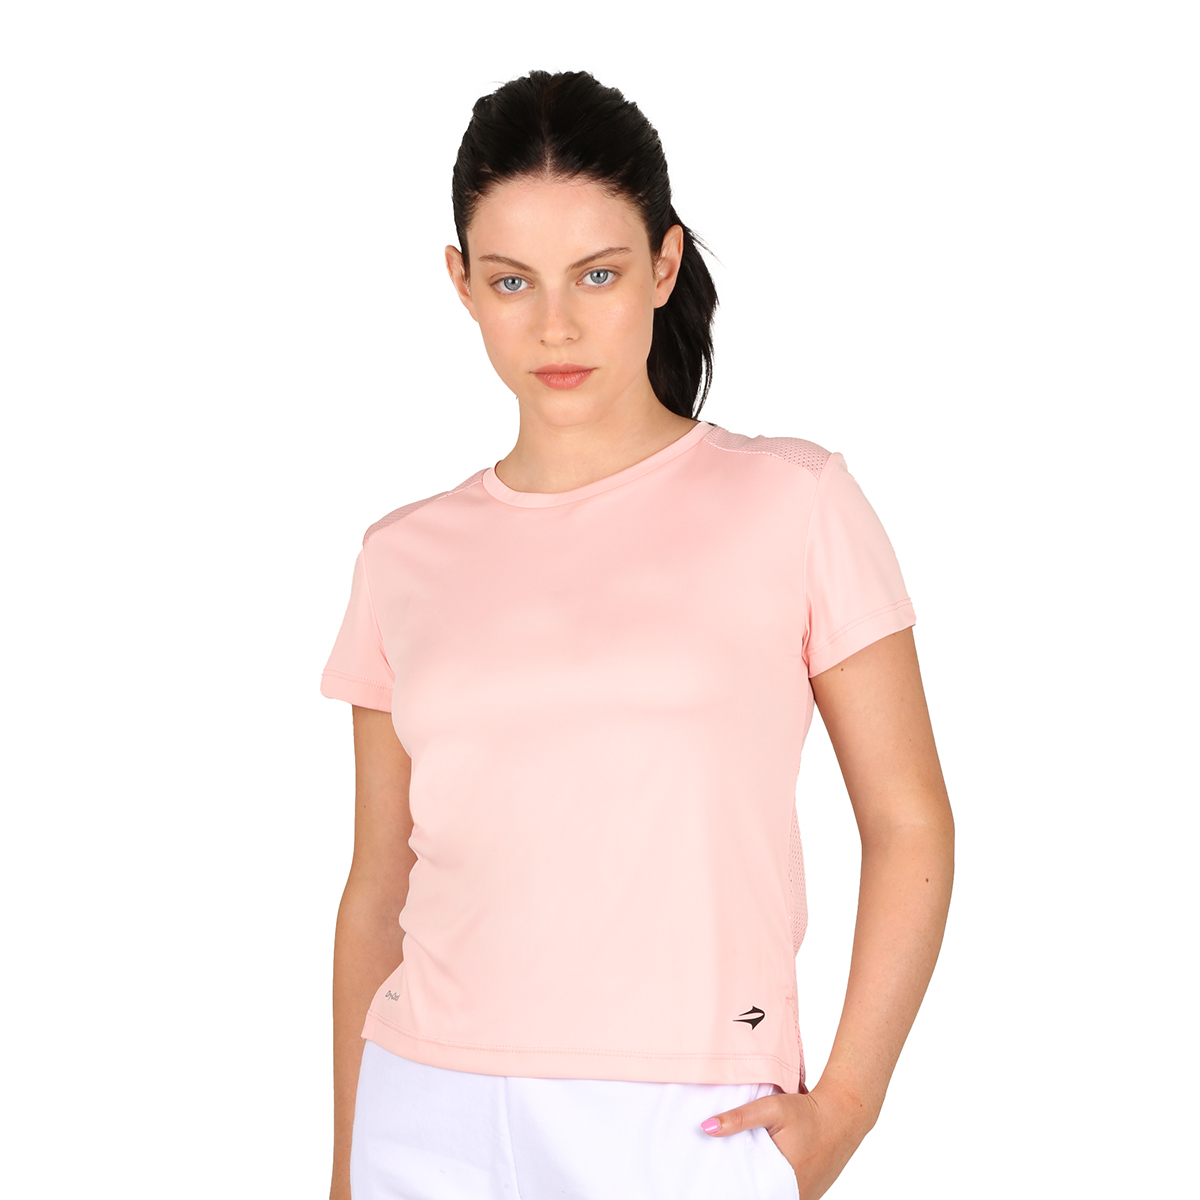 Remera Topper Open Mesh Training,  image number null